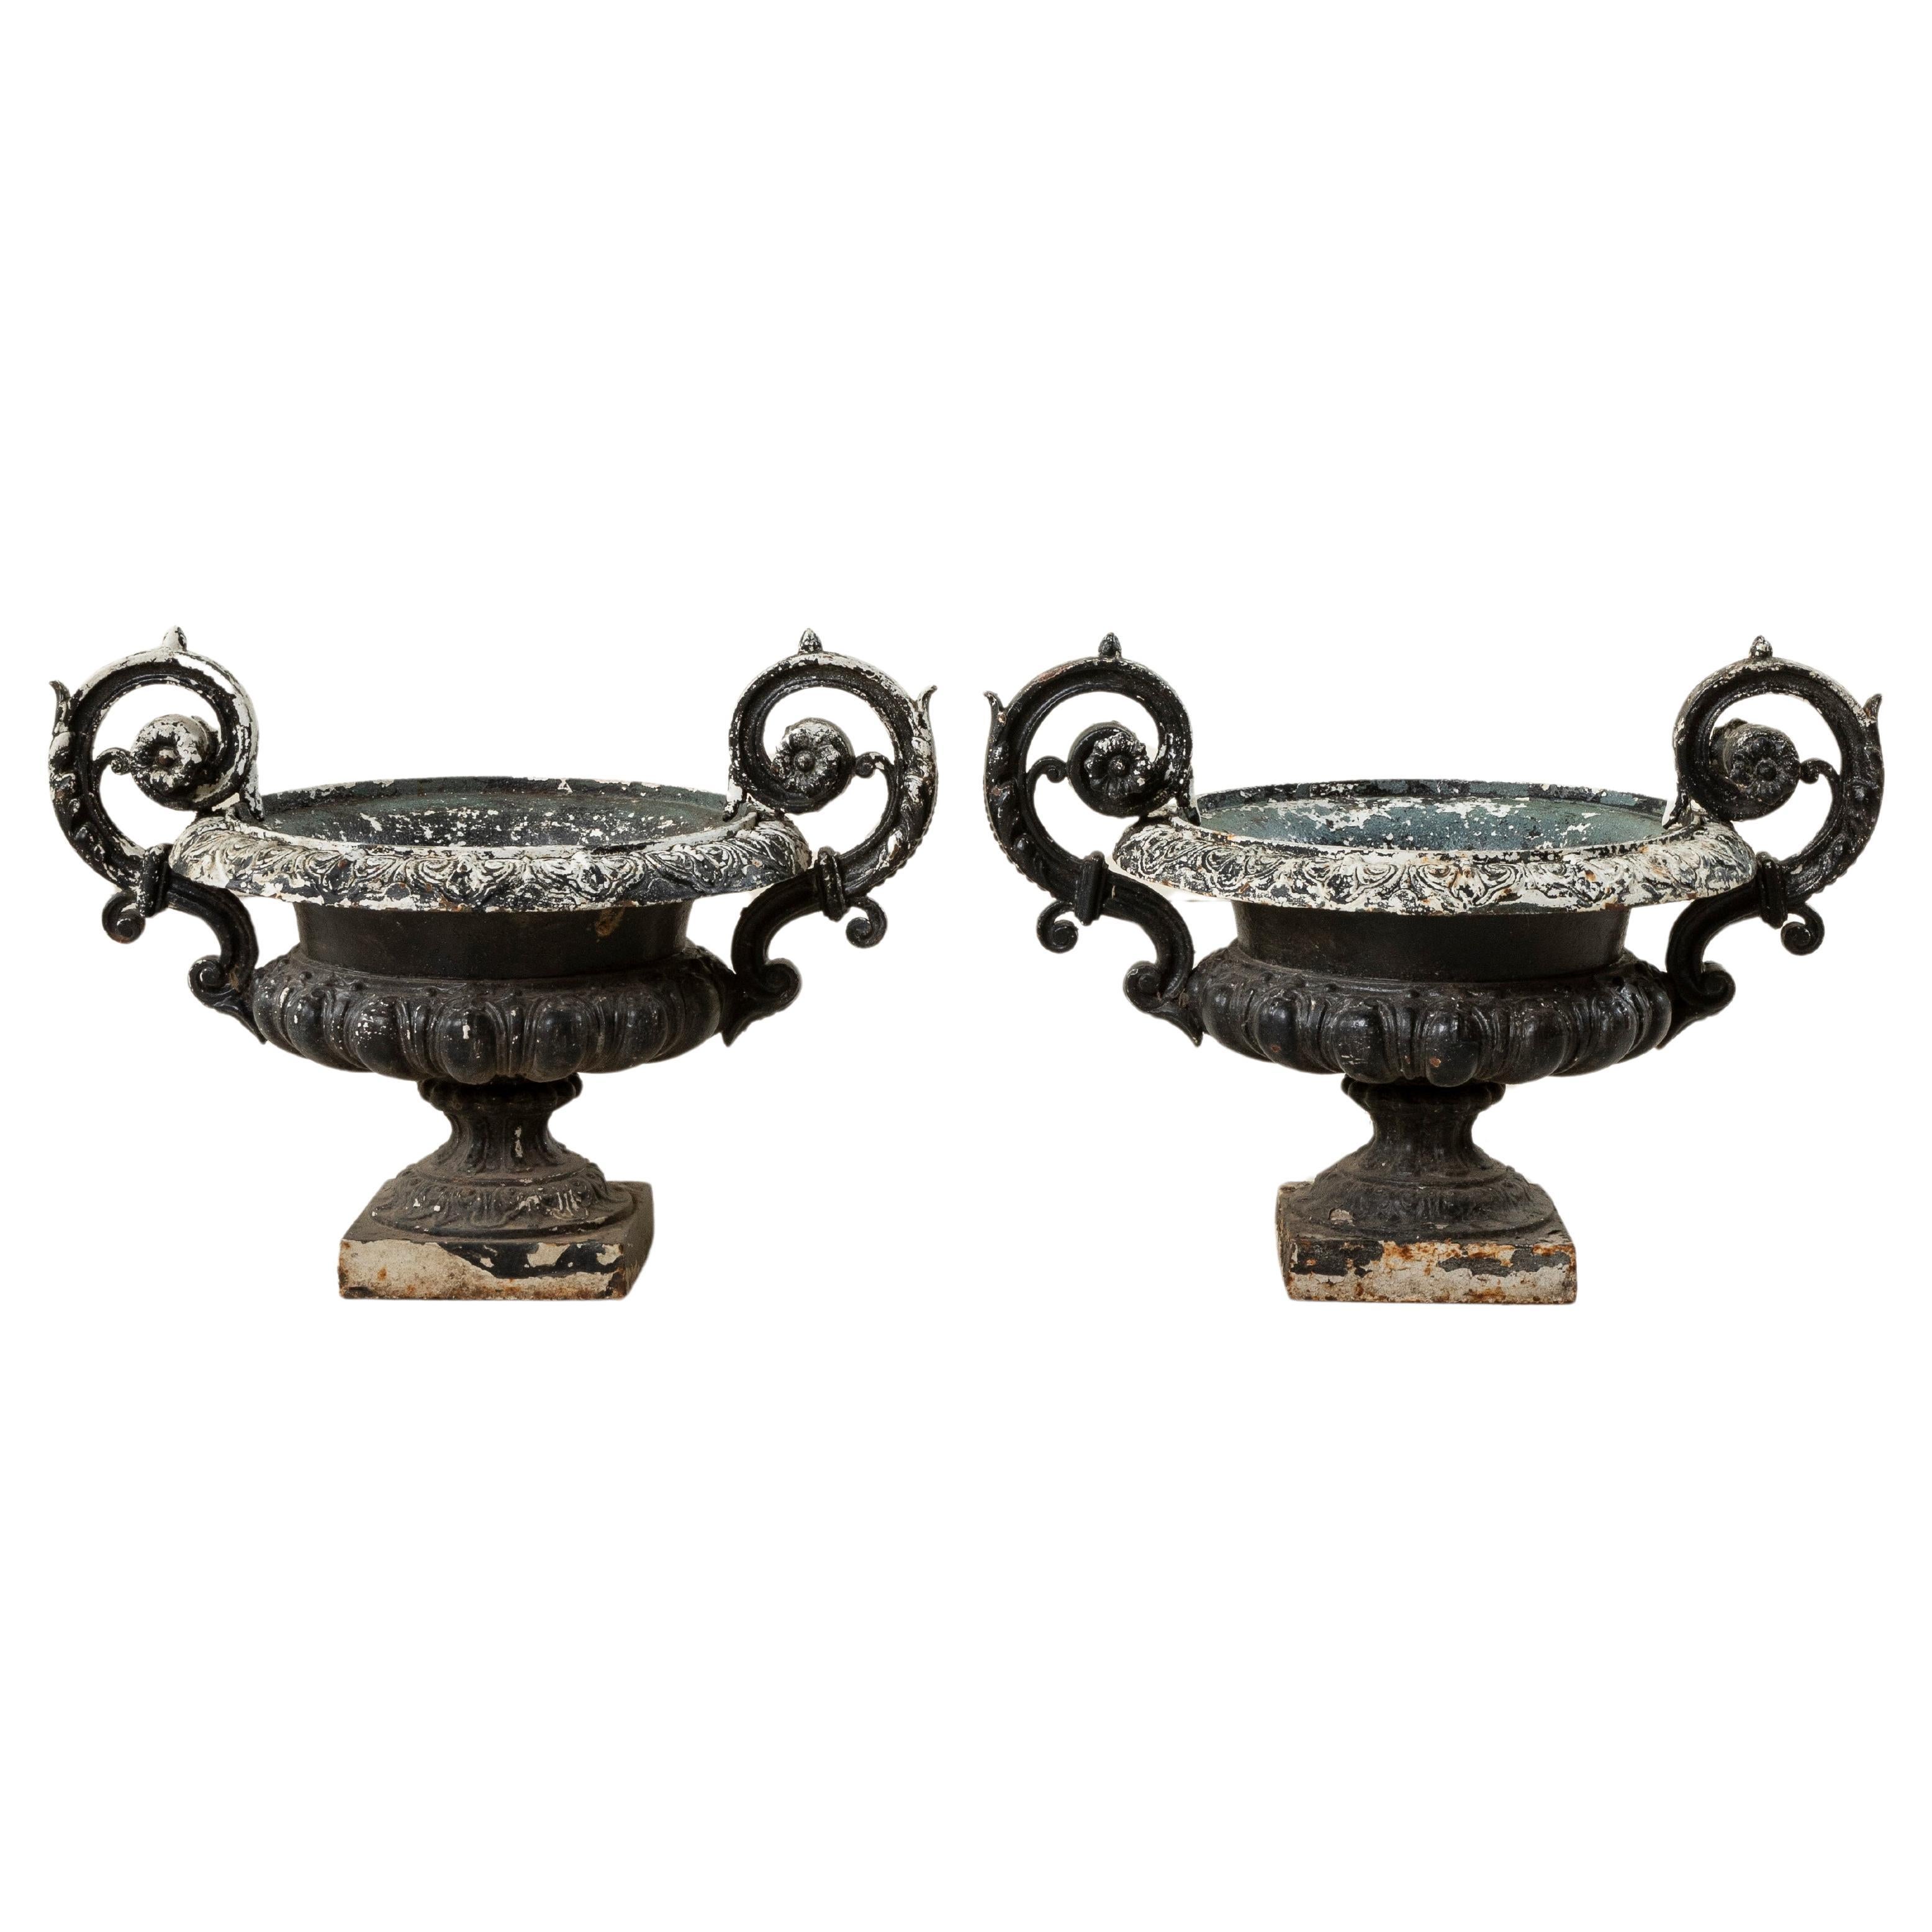 Pair of Large Late 19th Century French Cast Iron Jardinieres, Urns, Planters